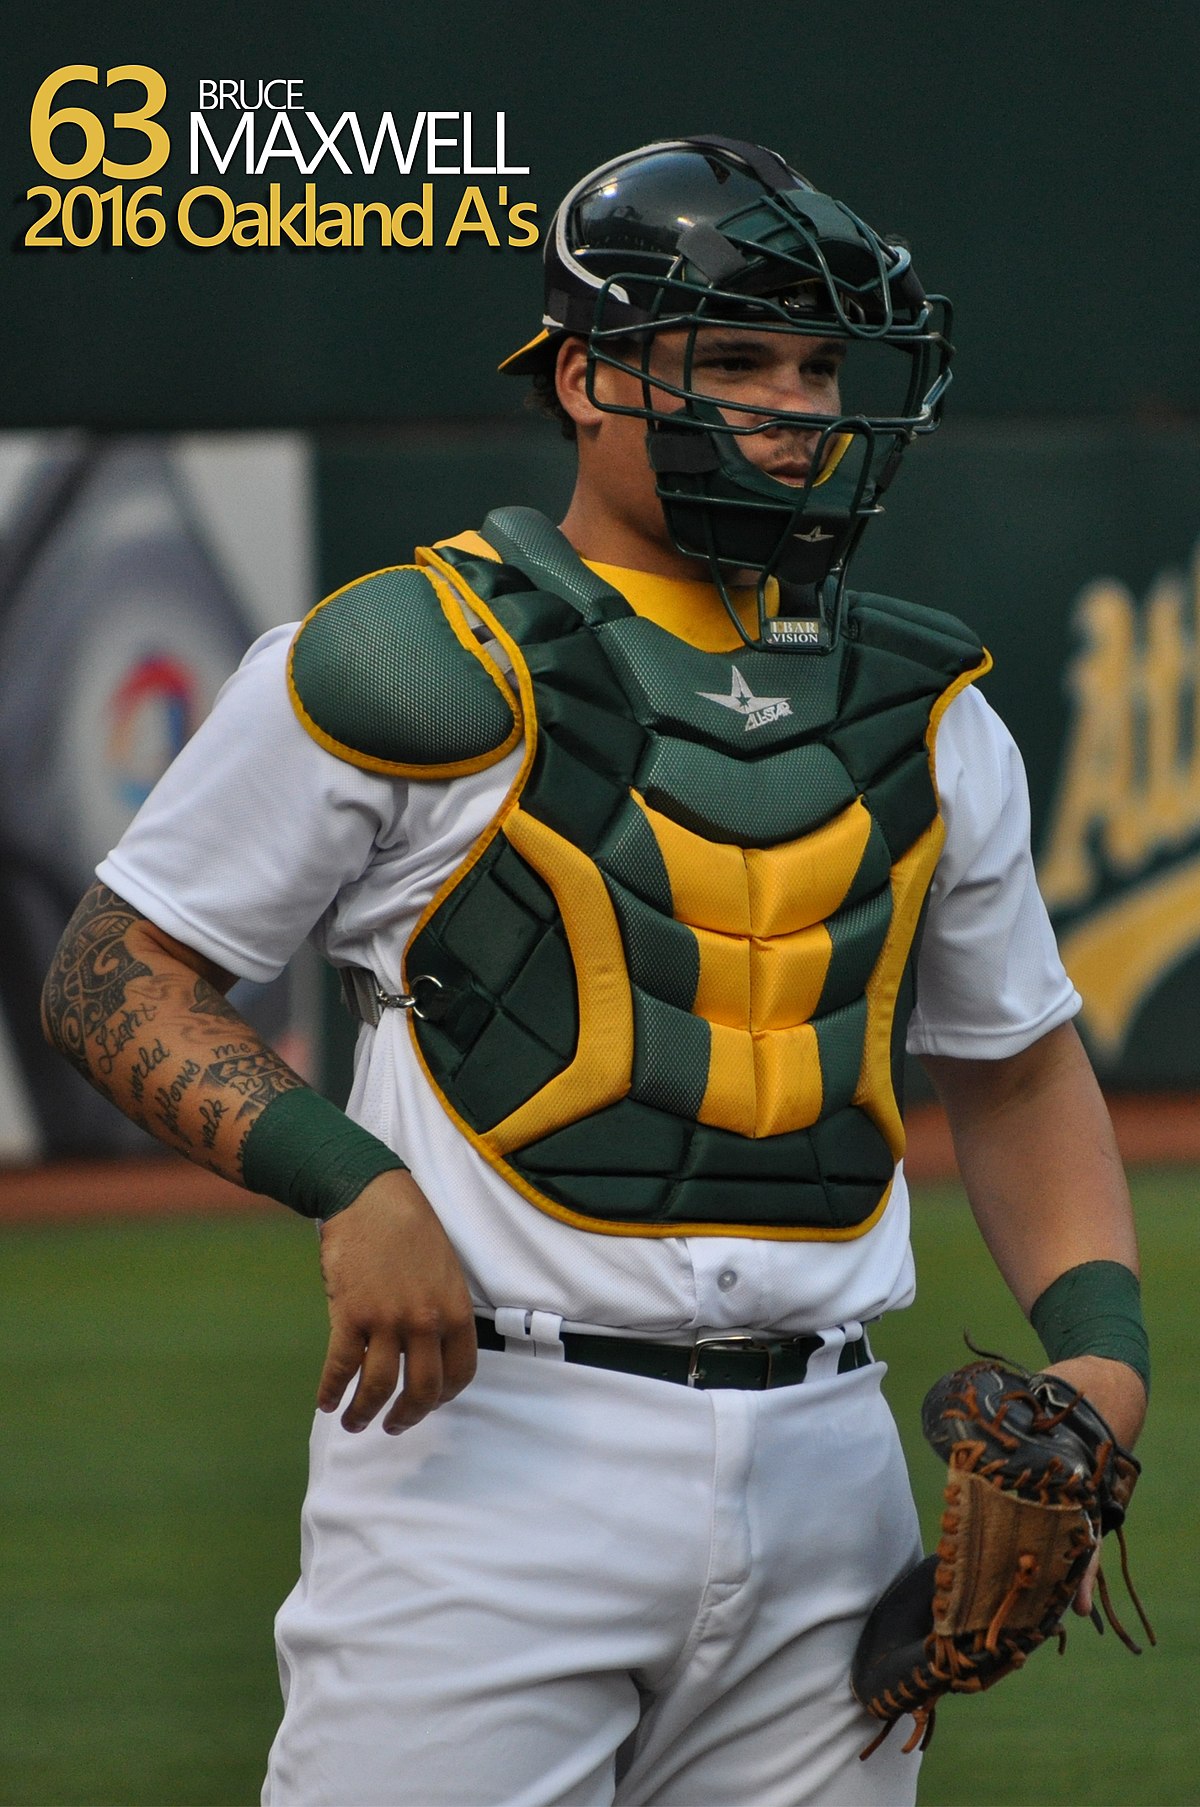 Former Birmingham-Southern athlete Bruce Maxwell becomes first MLB player to kneel during national anthem